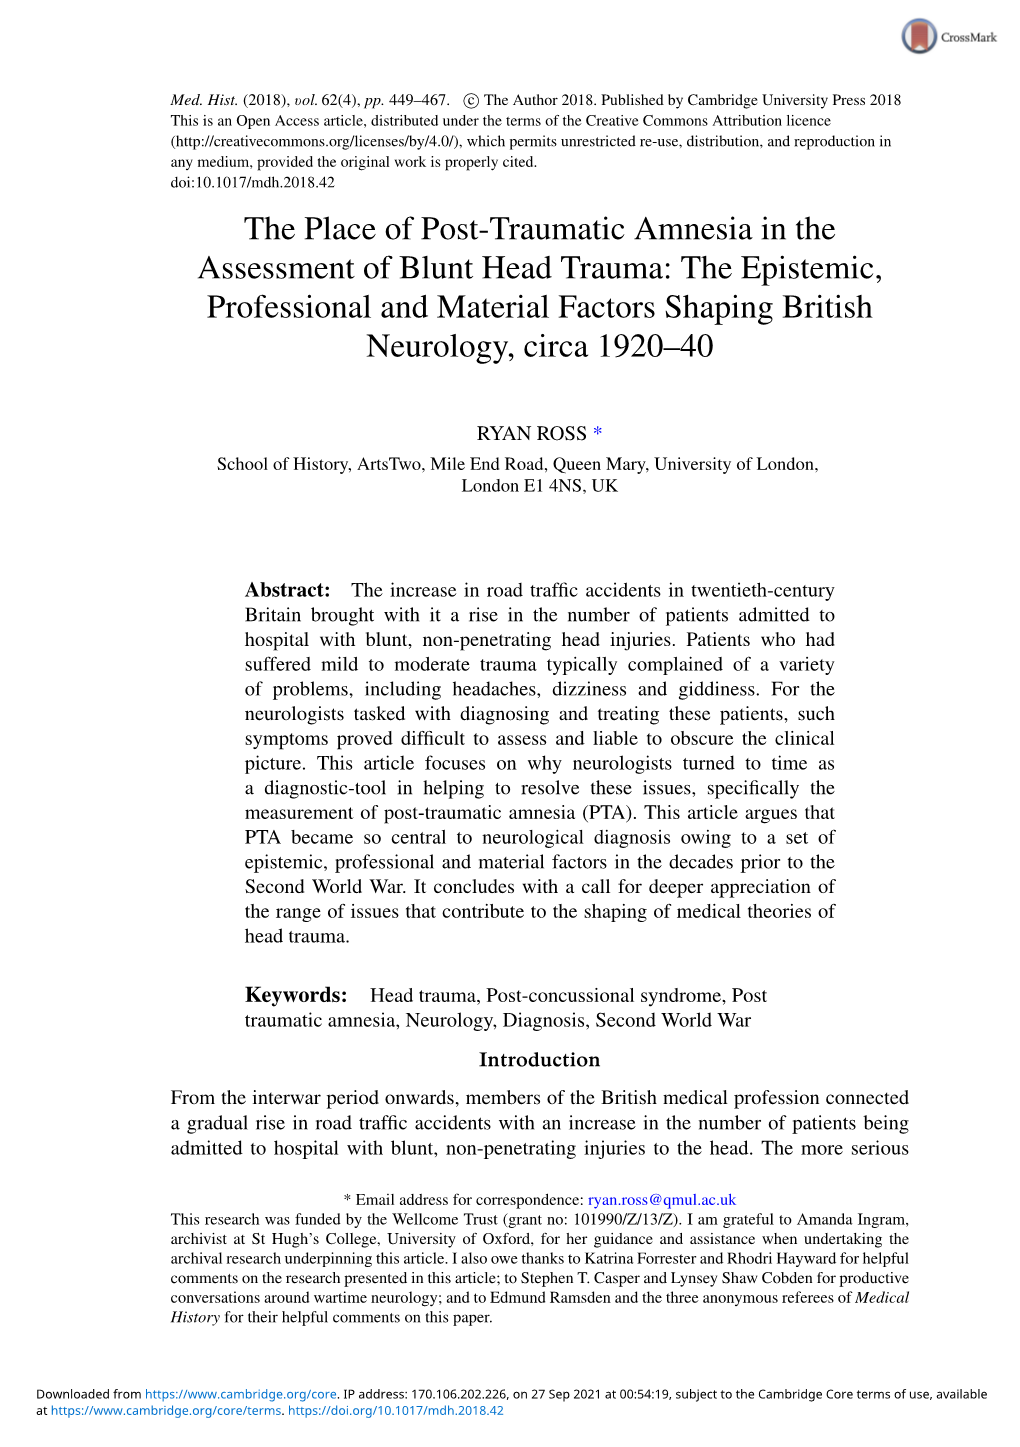 The Place of Post-Traumatic Amnesia in the Assessment of Blunt Head Trauma: the Epistemic, Professional and Material Factors Shaping British Neurology, Circa 1920–40